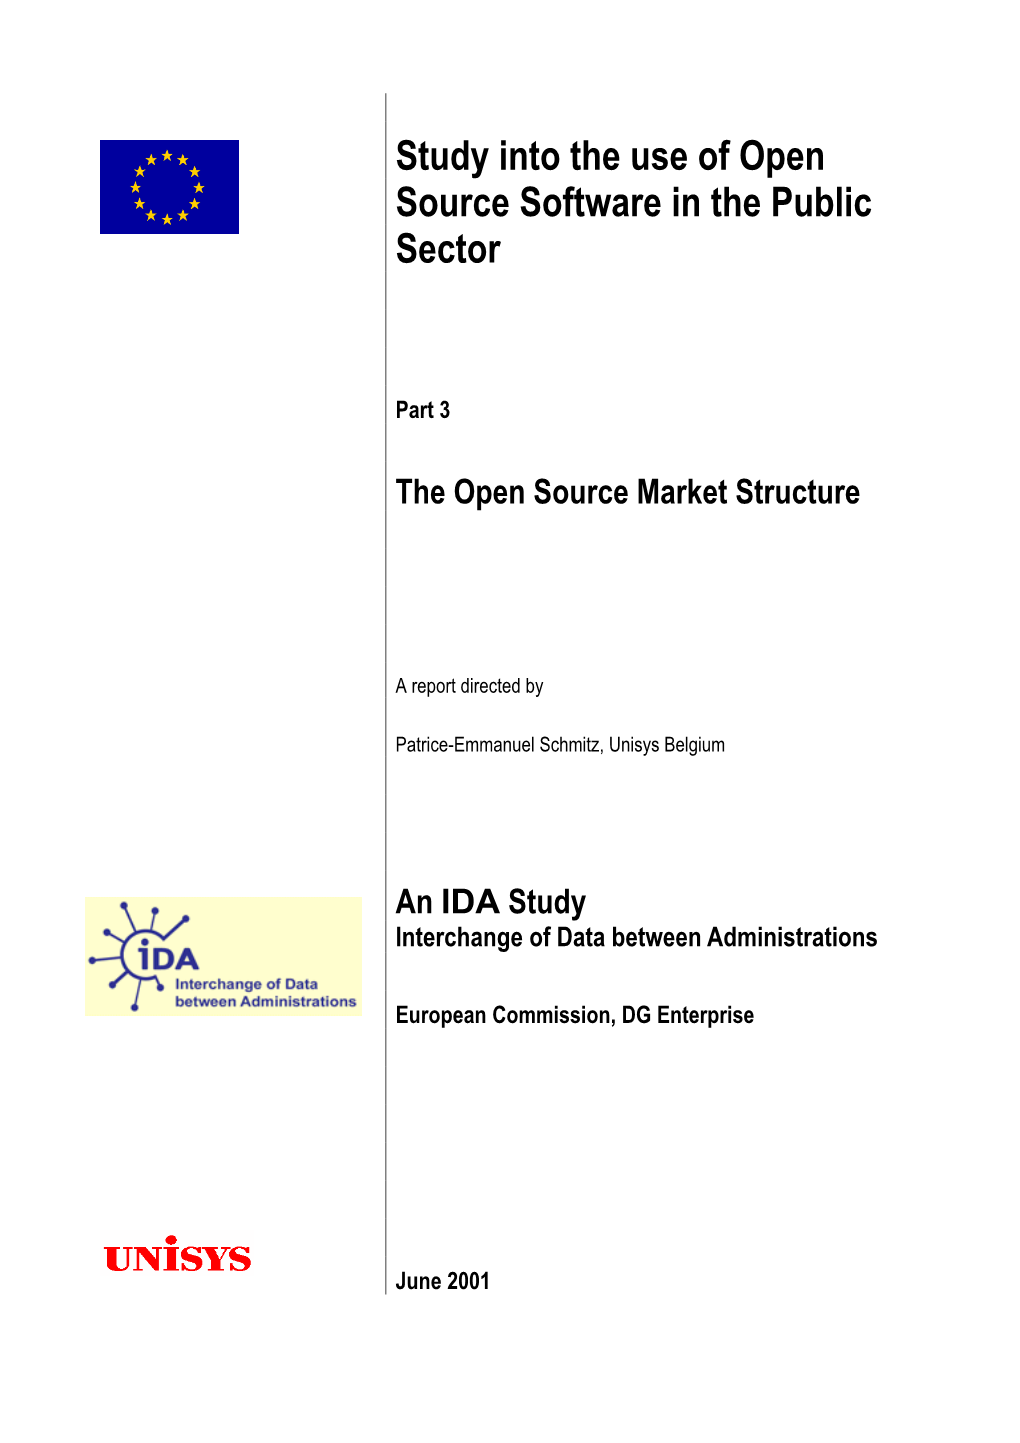 Study Into the Use of Open Source Software in the Public Sector